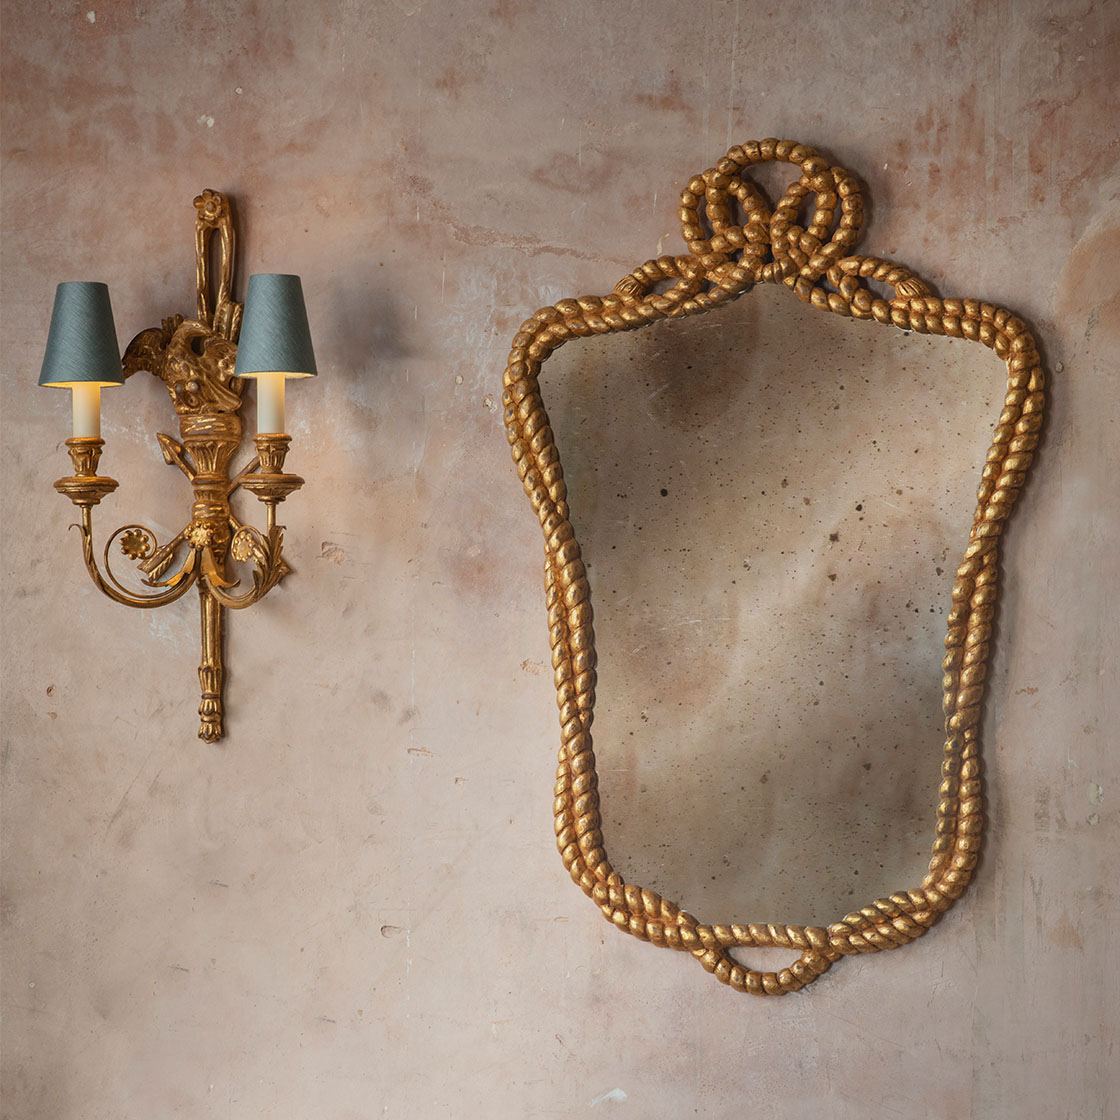 Nelson mirror in Burnt gold with Regency light in Burnt gold - Beaumont & Fletcher